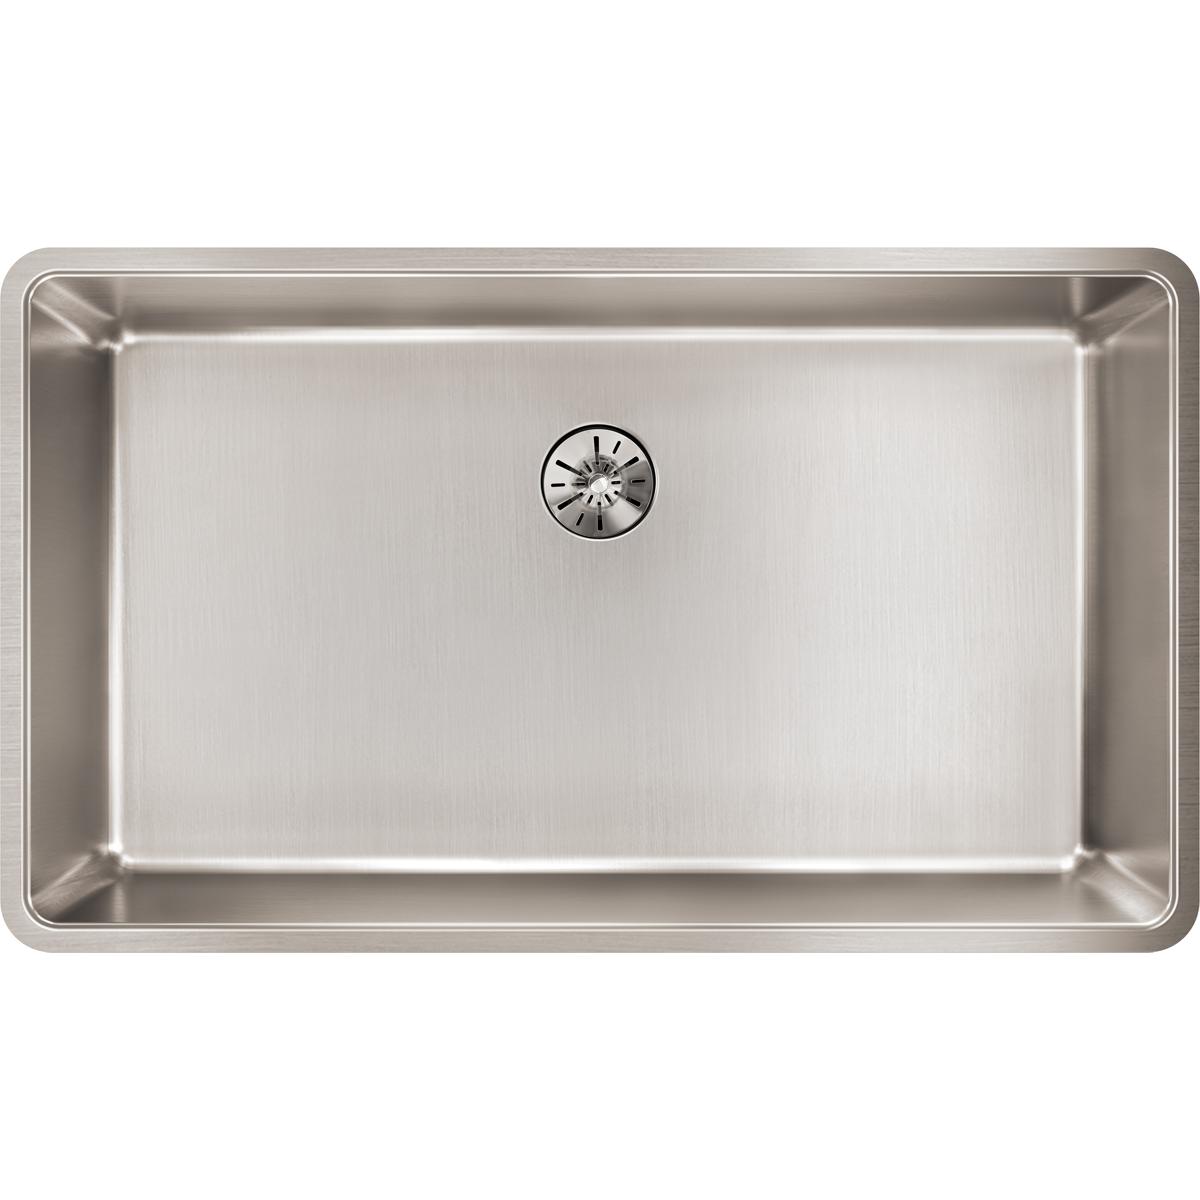 Elkay Lustertone Iconix Stainless Steel 32-1/2" x 19-1/2" x 9" Single Bowl Undermount Sink with Perfect Drain